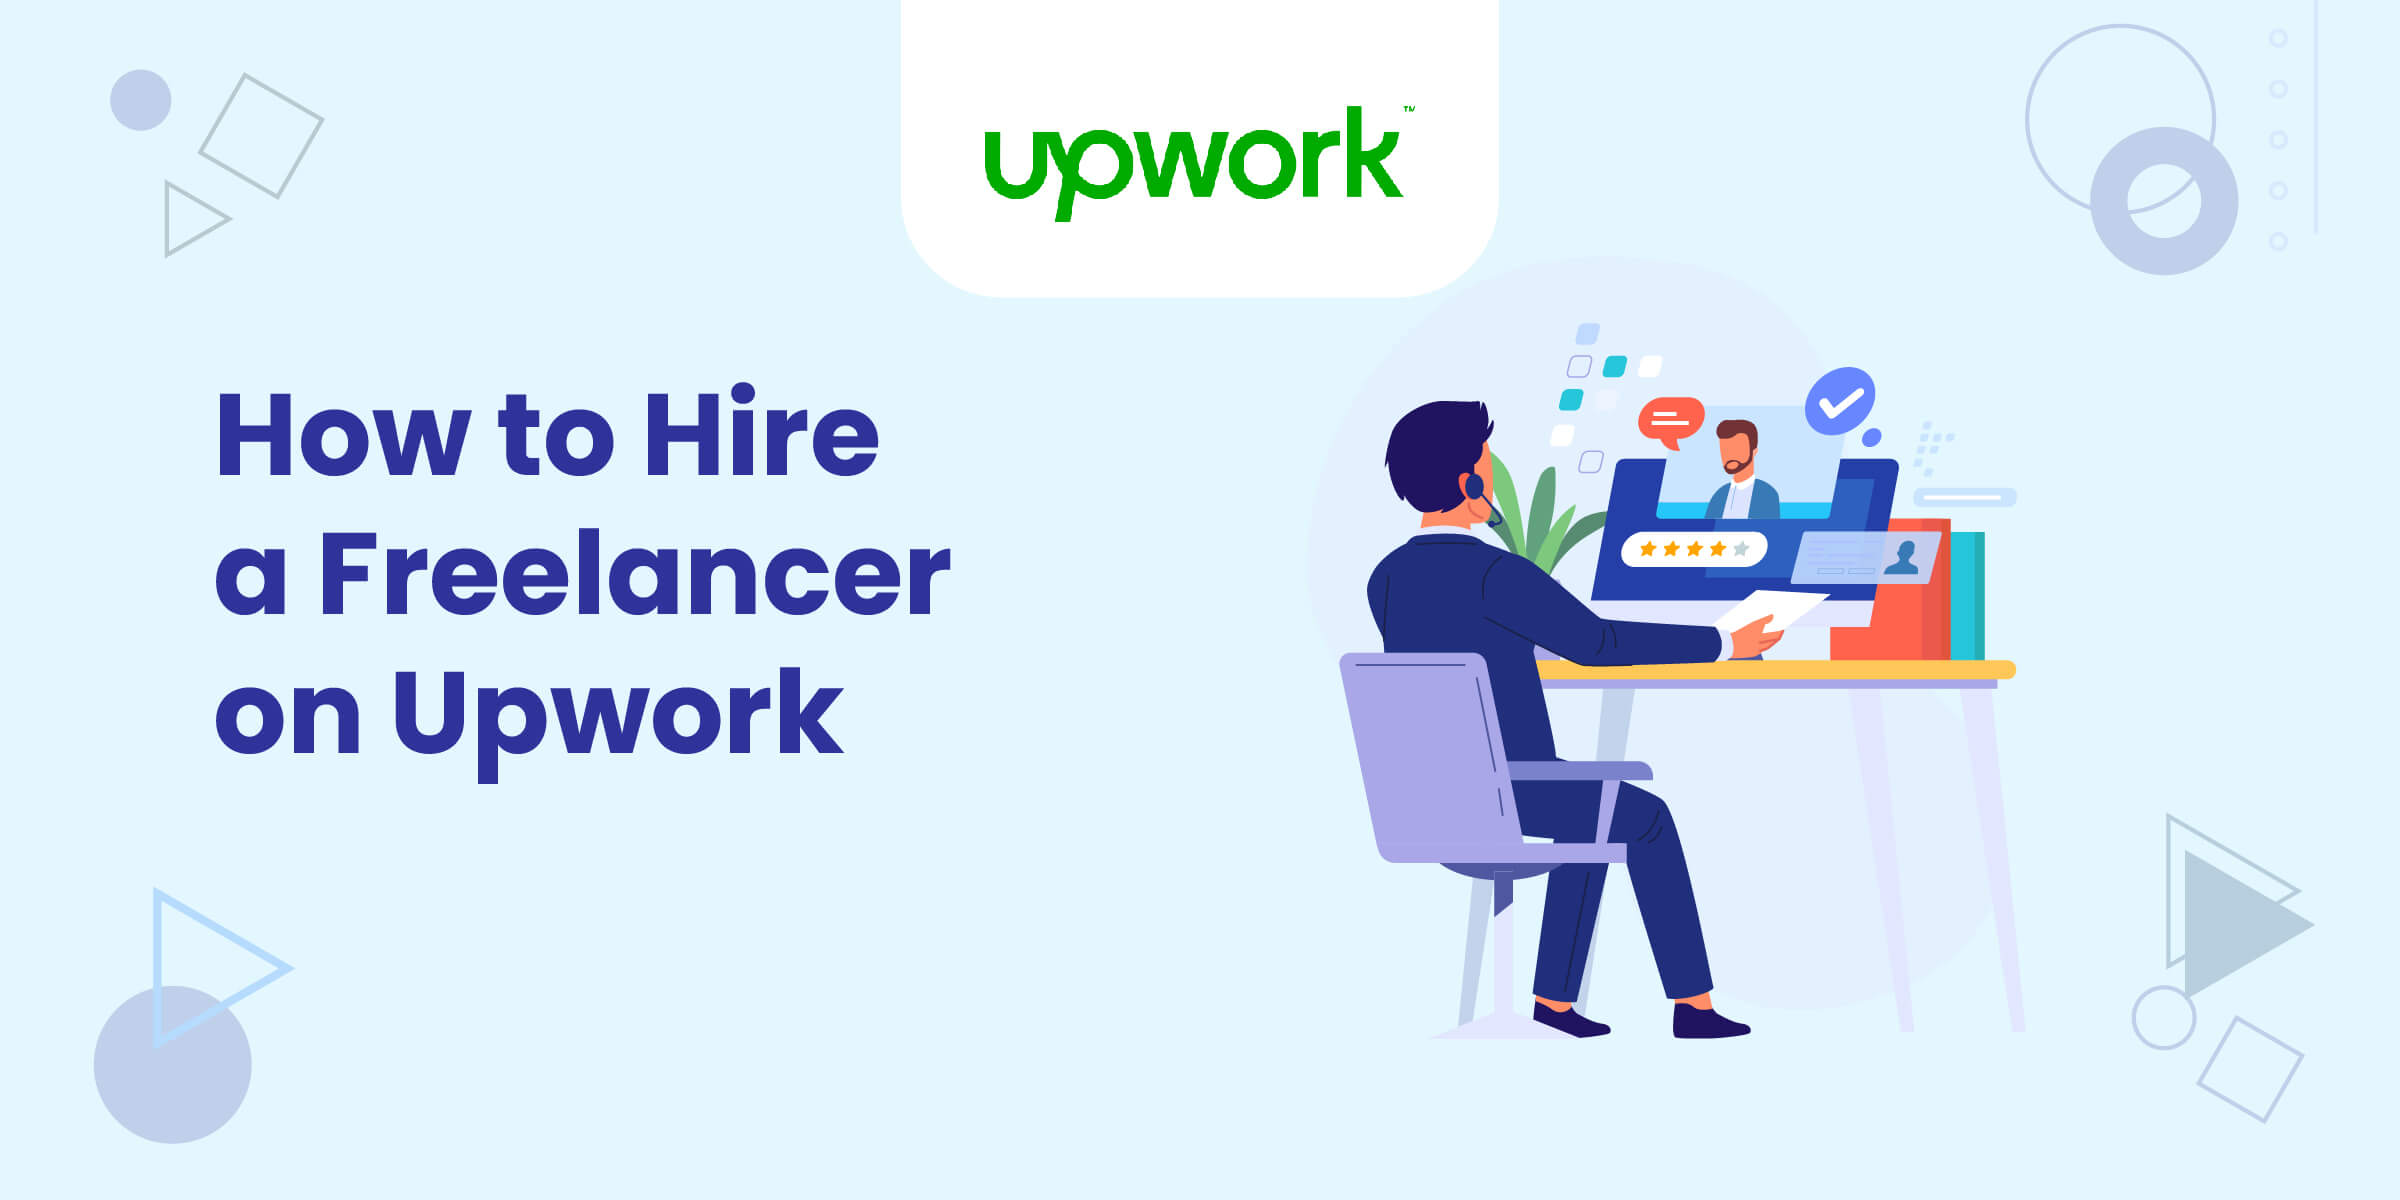 How to Hire a Freelancer on Upwork